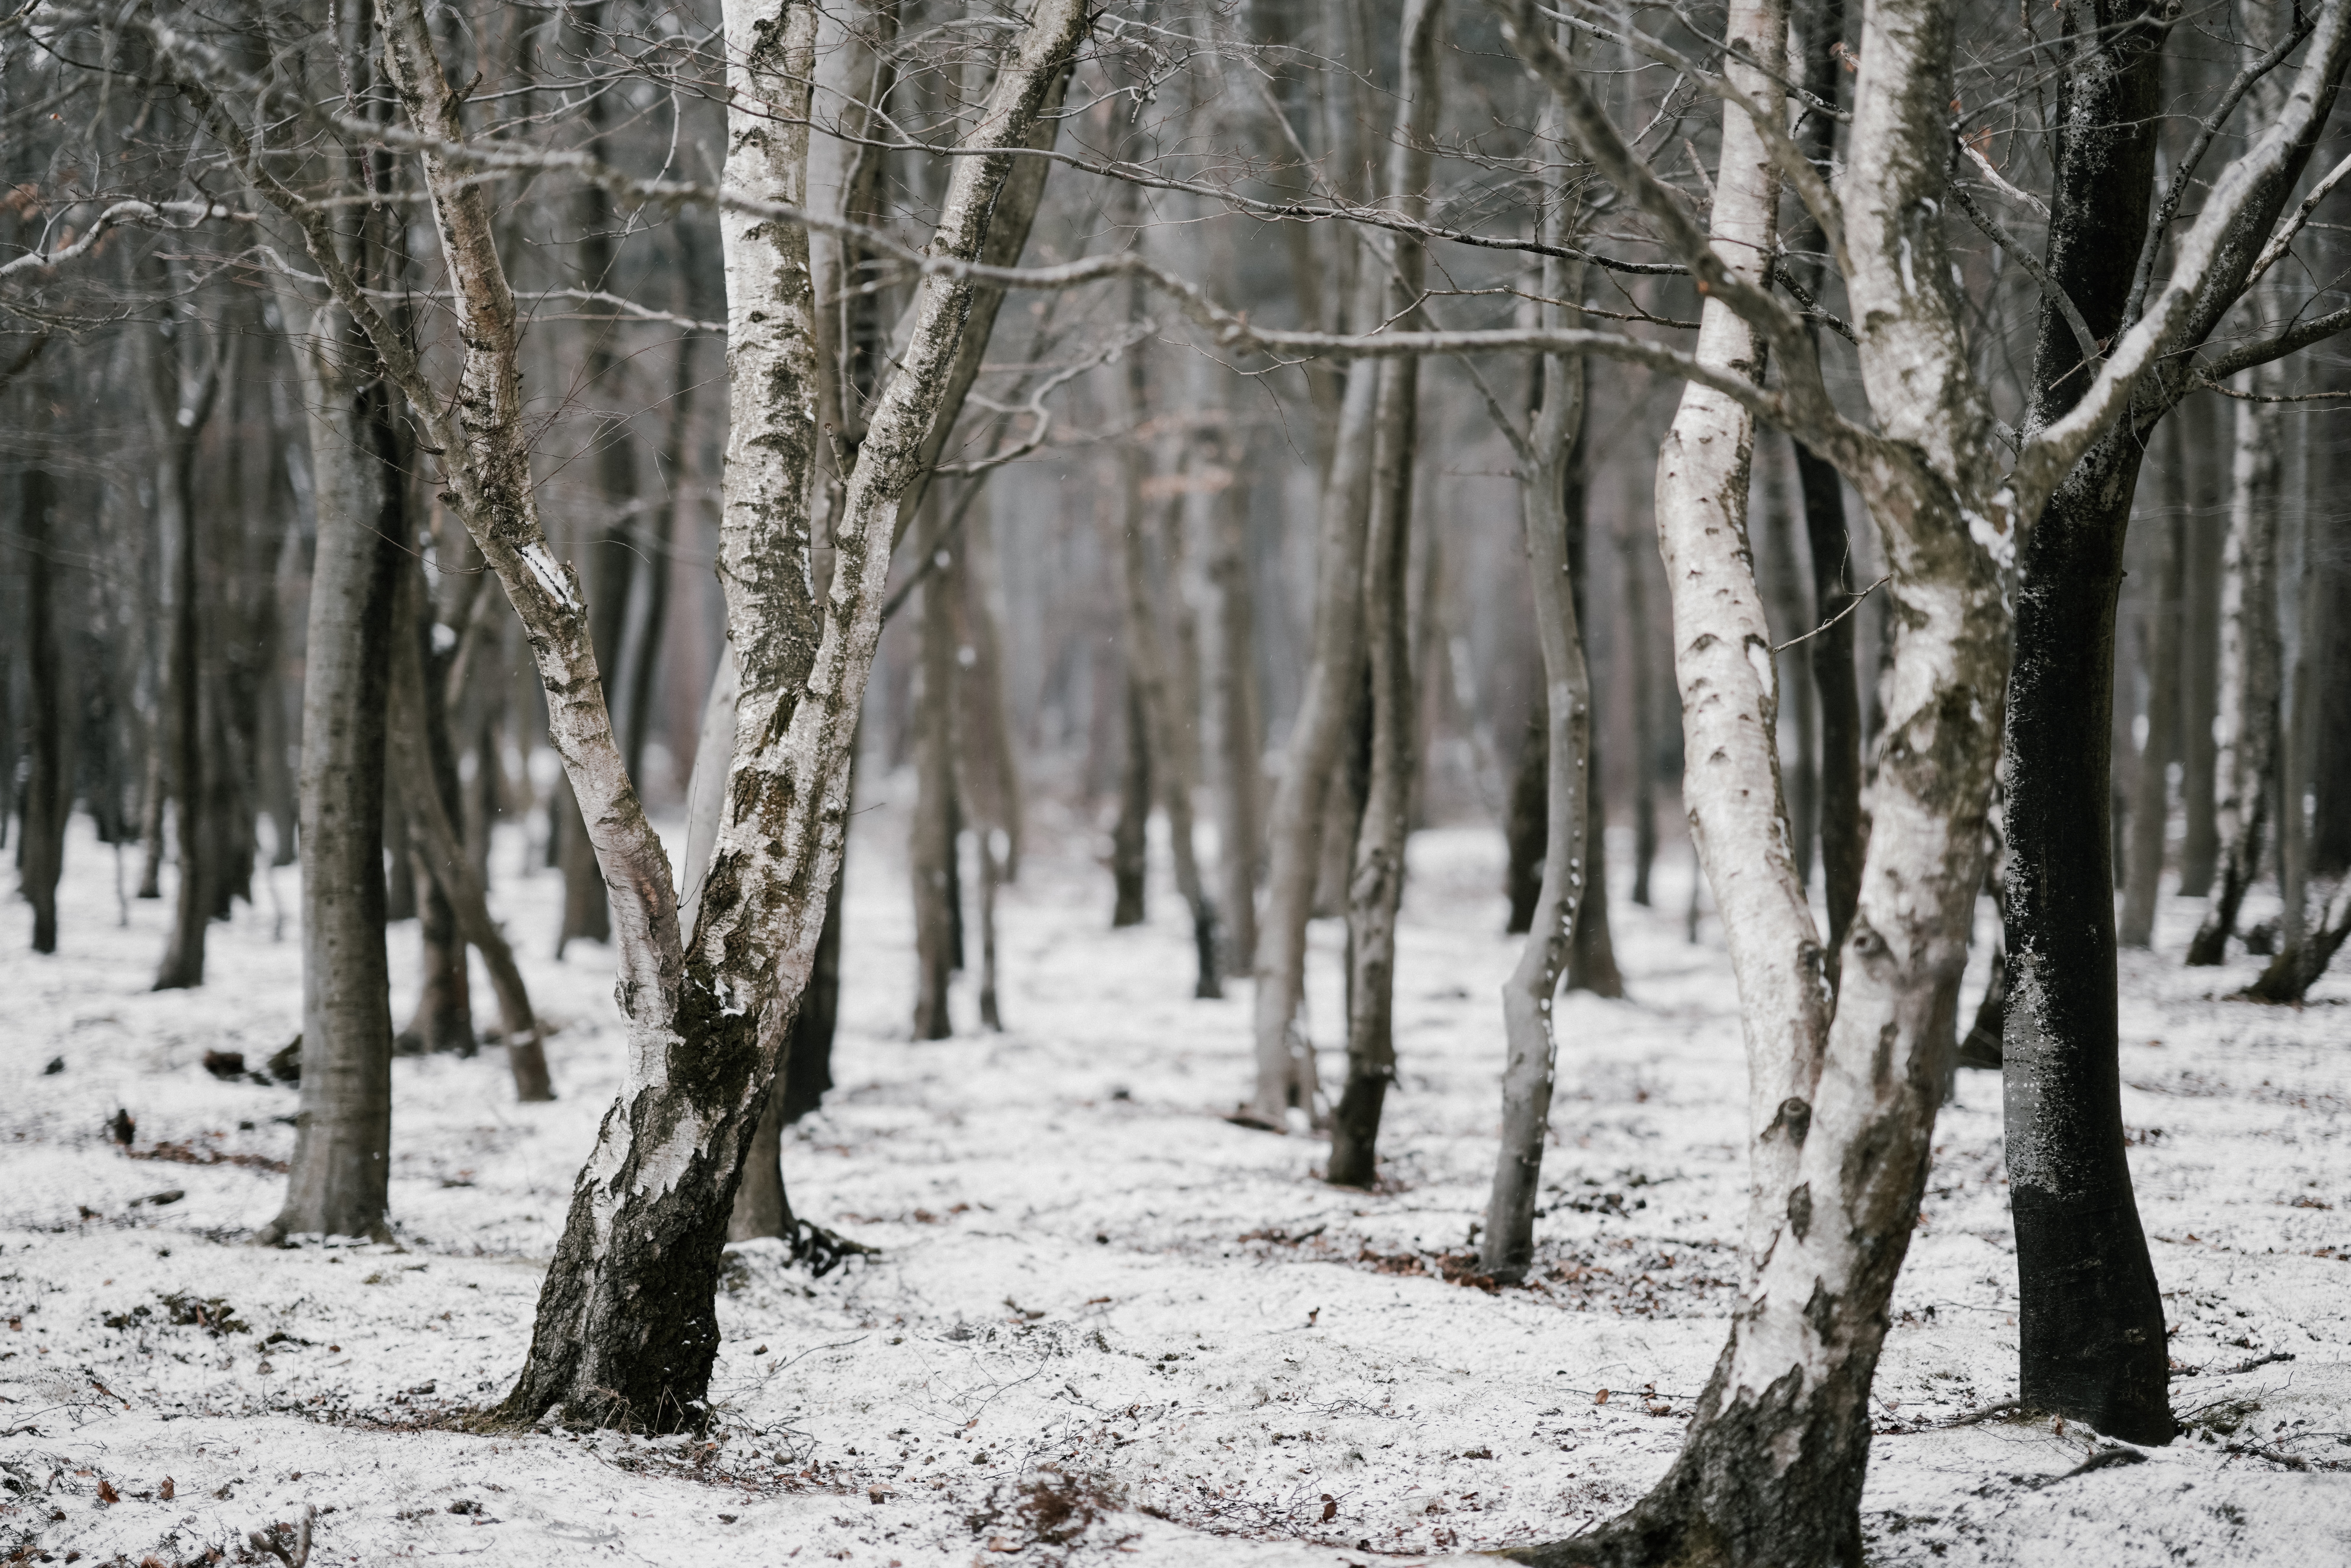 Winter Snow Forest Landscape Nature Trees Pine Trees Mist Photography Depth Of Field Branch Snow Cov 7952x5304